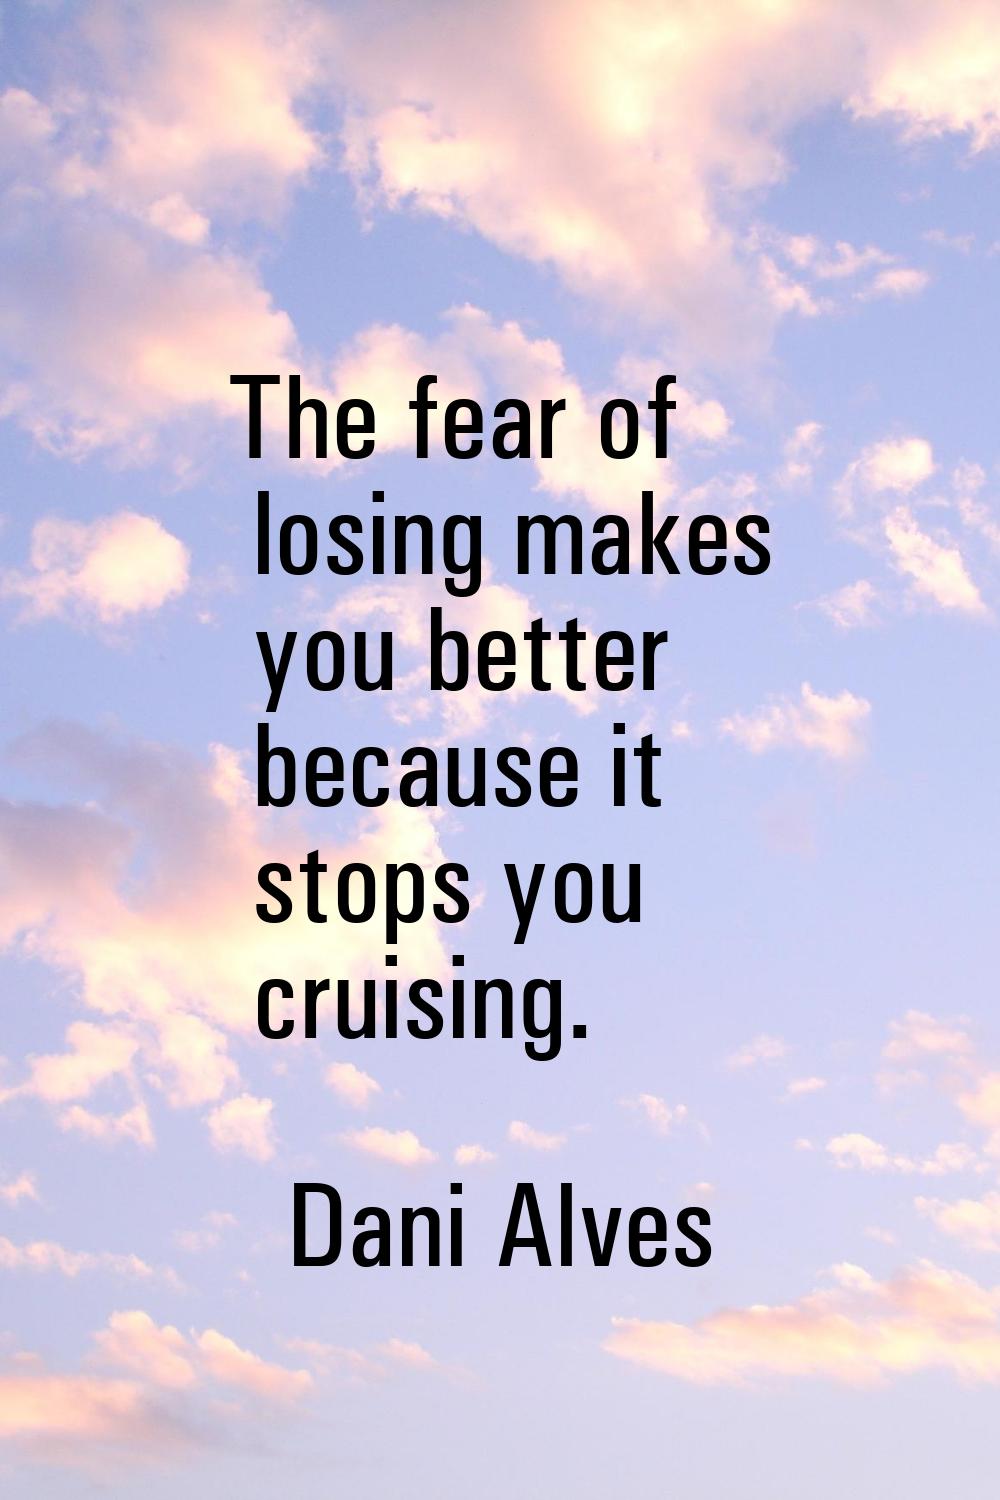 The fear of losing makes you better because it stops you cruising.